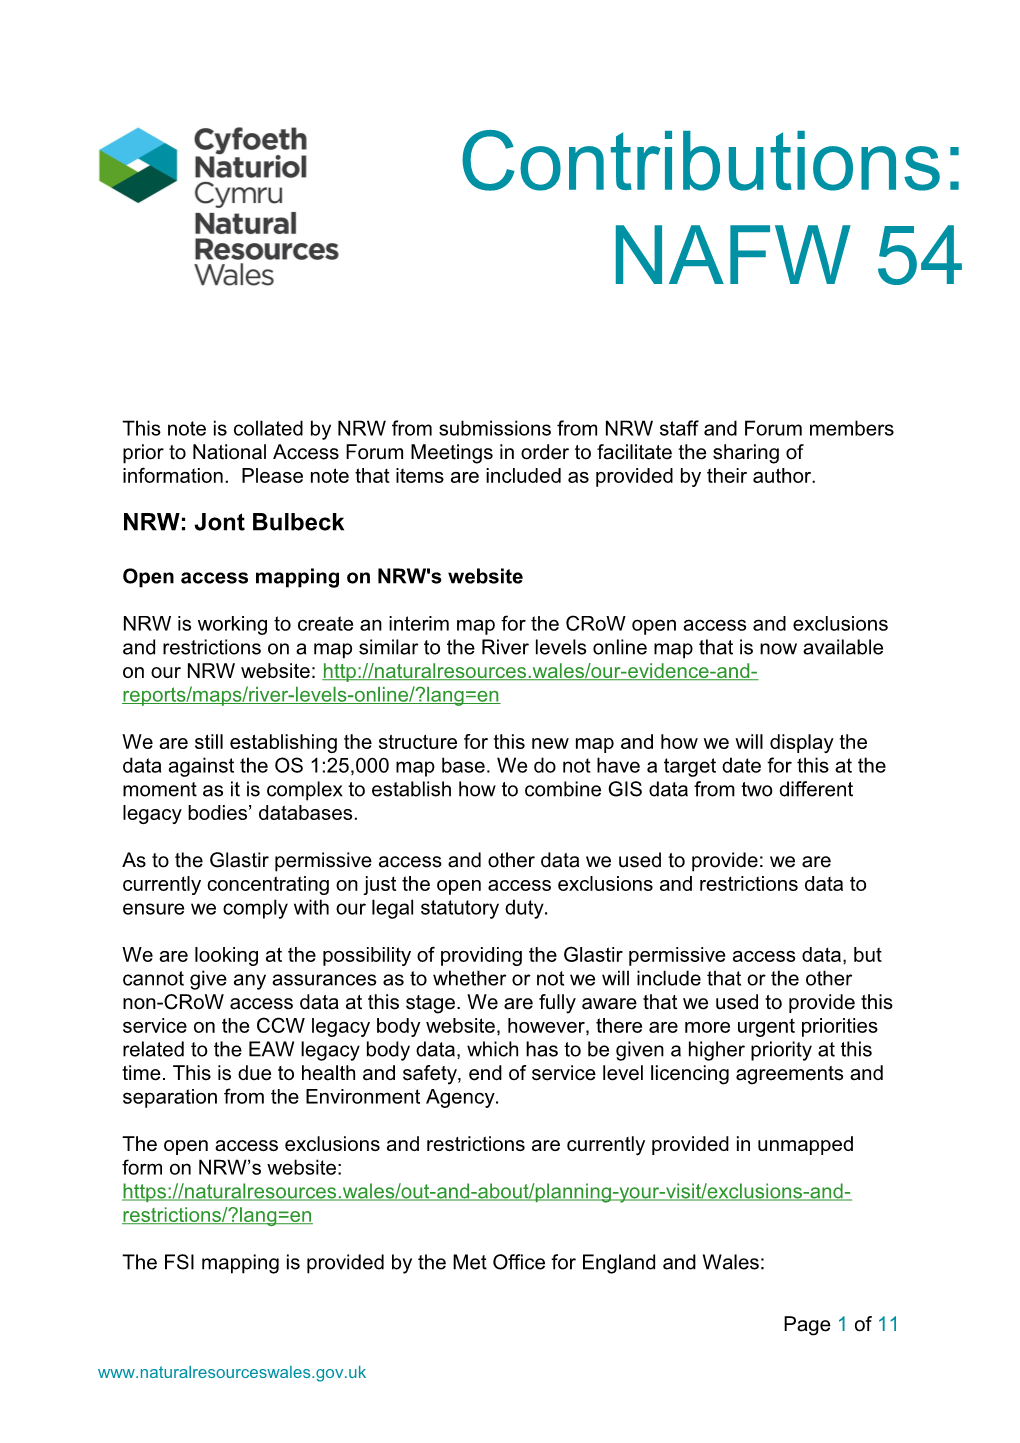 This Note Is Collated by NRW from Submissions from NRW Staff and Forum Members Prior To